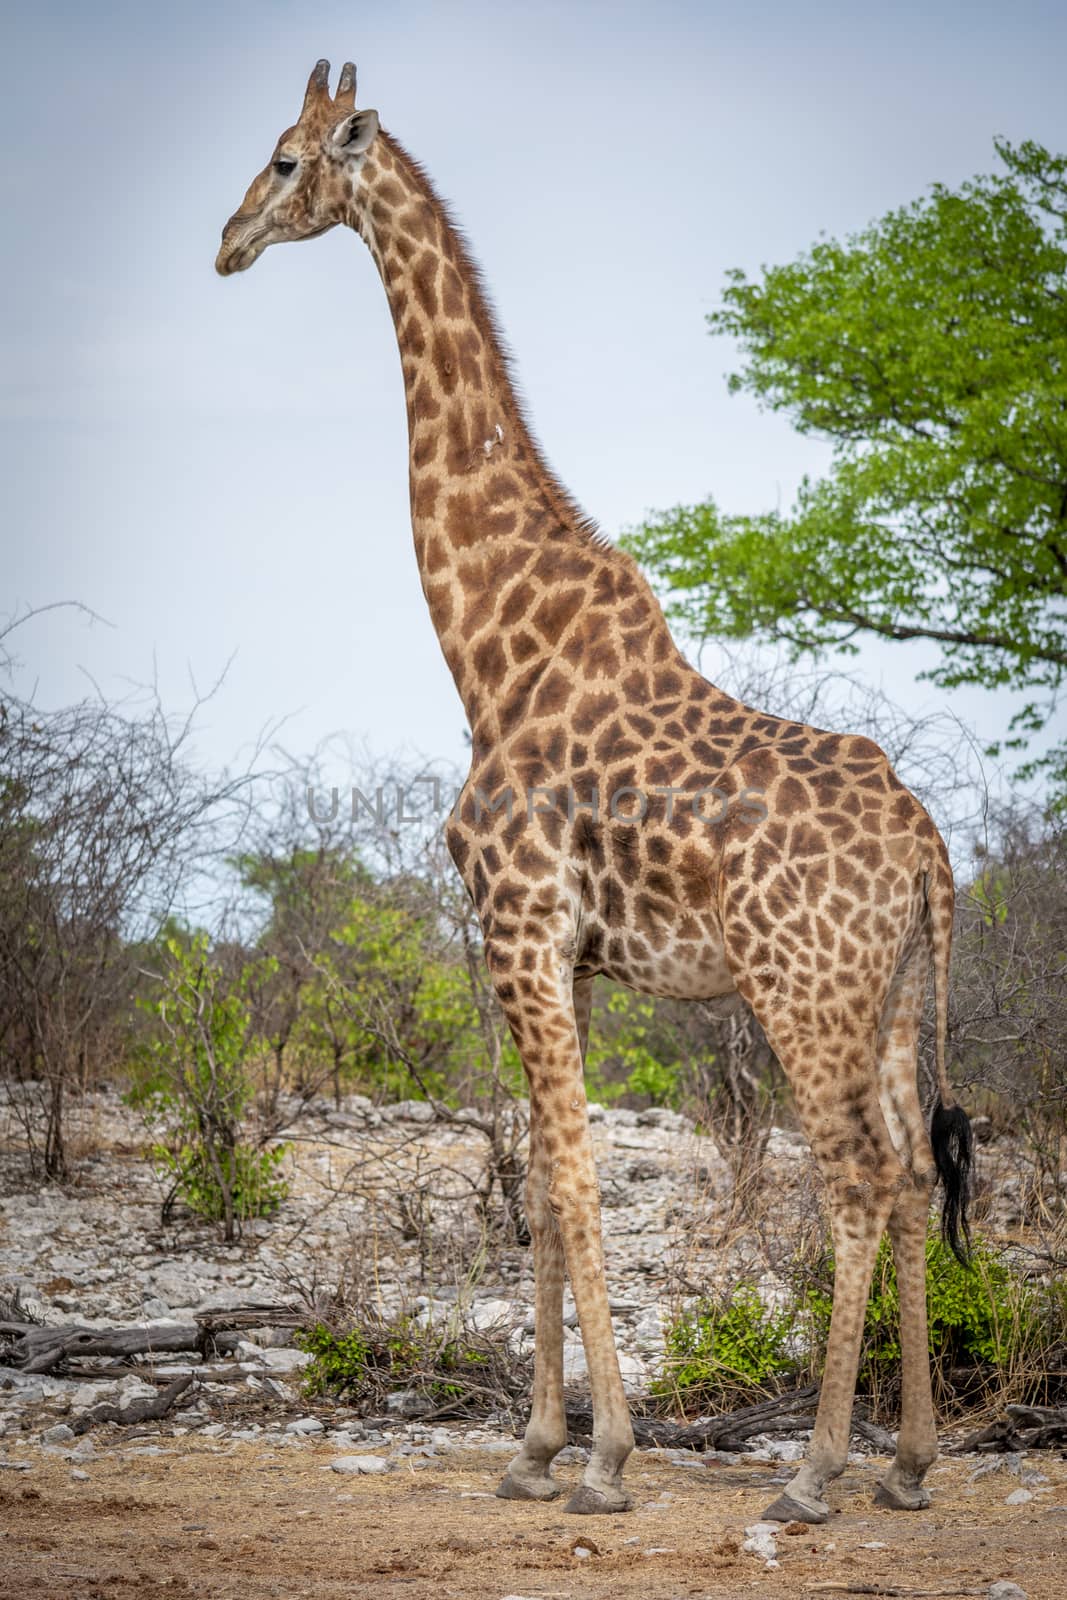 Giraffe standing gracefully and with elegance in the wilderness of the african savanna during safari by kb79